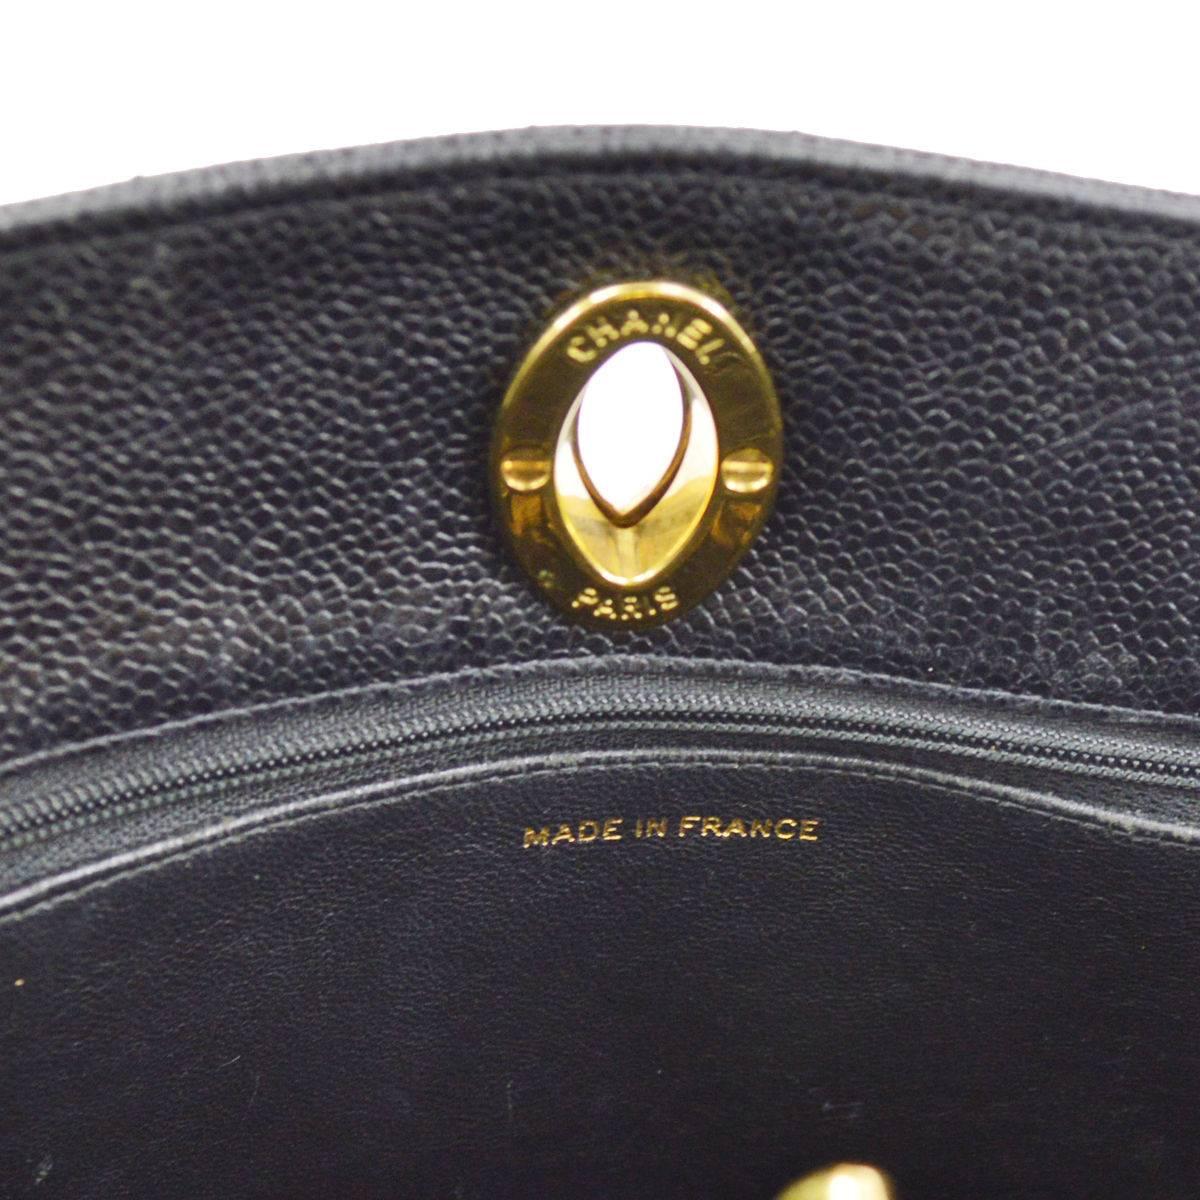 Chanel Black Caviar Leather Quilted Gold Shopper Carryall Tote Shoulder Bag 5